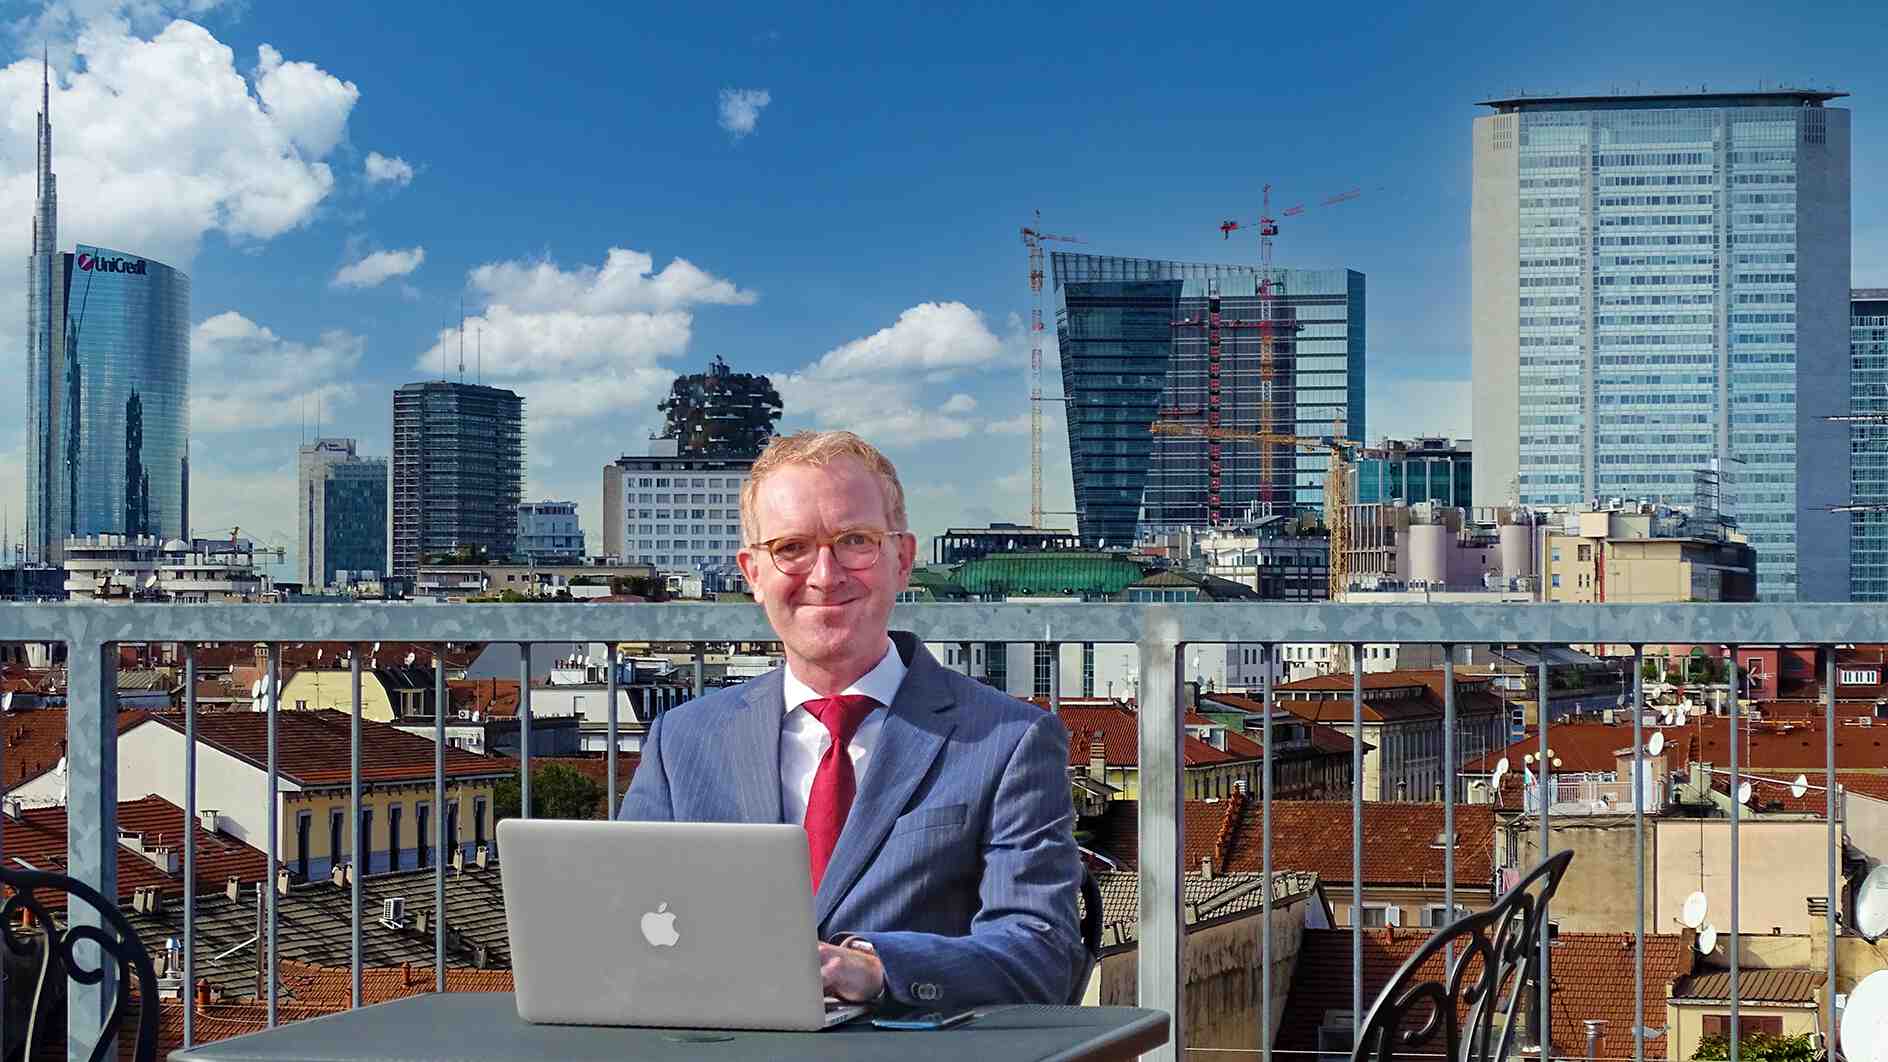 Man in suit and tie working on a MacBook on a rooftop in front of the skyline of Milan